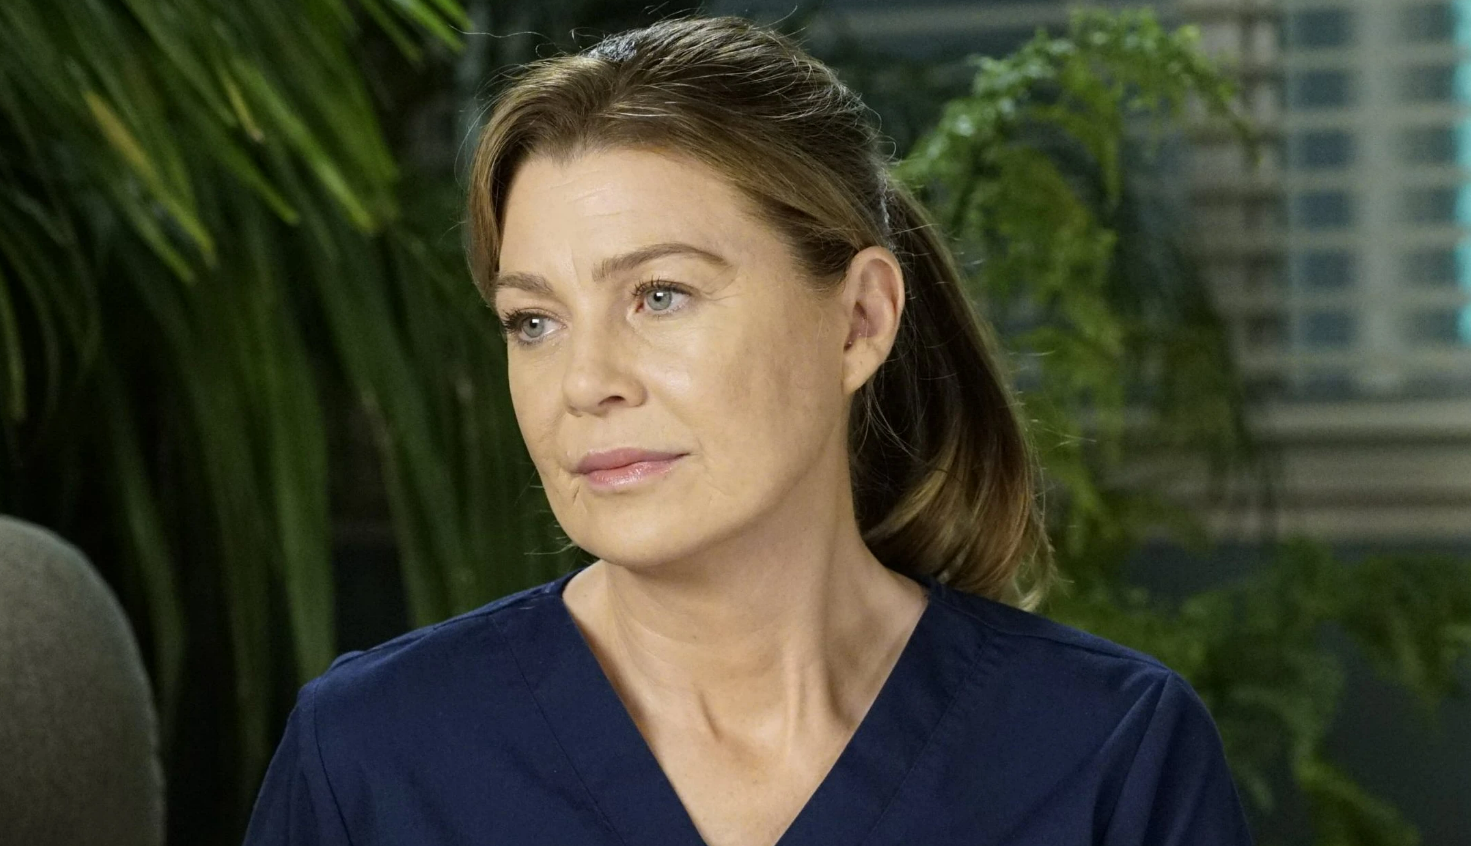 Grey's Anatomy went stale nine seasons ago. But I'll never stop watching it